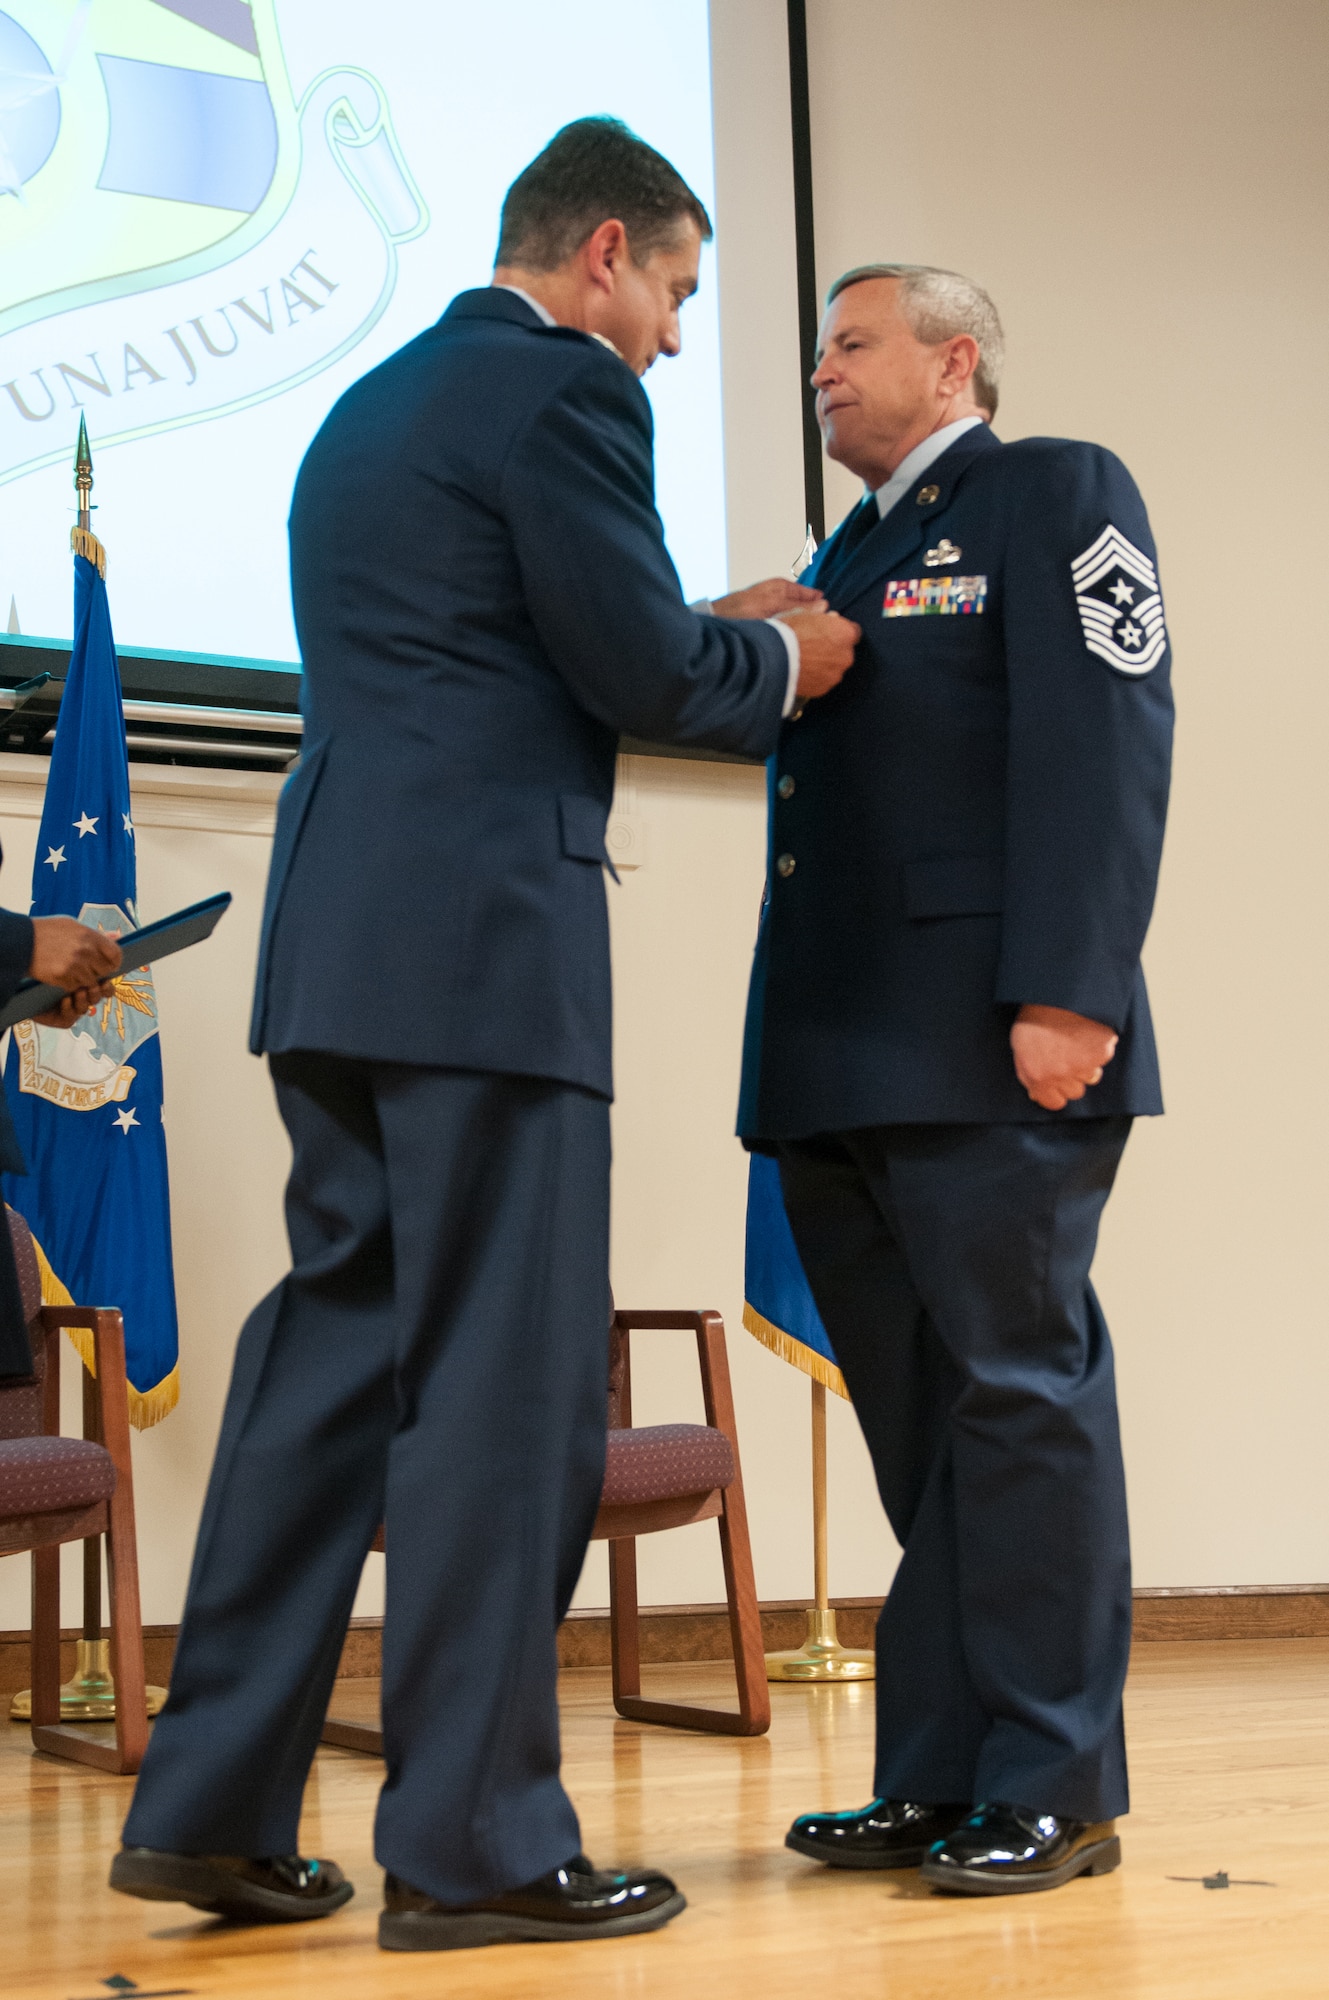 Col. Warren Hurst (left), Kentucky’s assistant adjutant general for Air, pins the Meritorious Service Medal on Chief Master Sgt. Curtis R. Carpenter, outgoing 123rd Airlift Wing command chief, during Carpenter’s retirement ceremony at the Kentucky Air National Guard Base in Louisville, Ky., on May 17, 2014. Carpenter served in the active-duty Air Force and Air National Guard for more than 34 years. (U.S. Air National Guard photo by Airman 1st Class Joshua Horton)